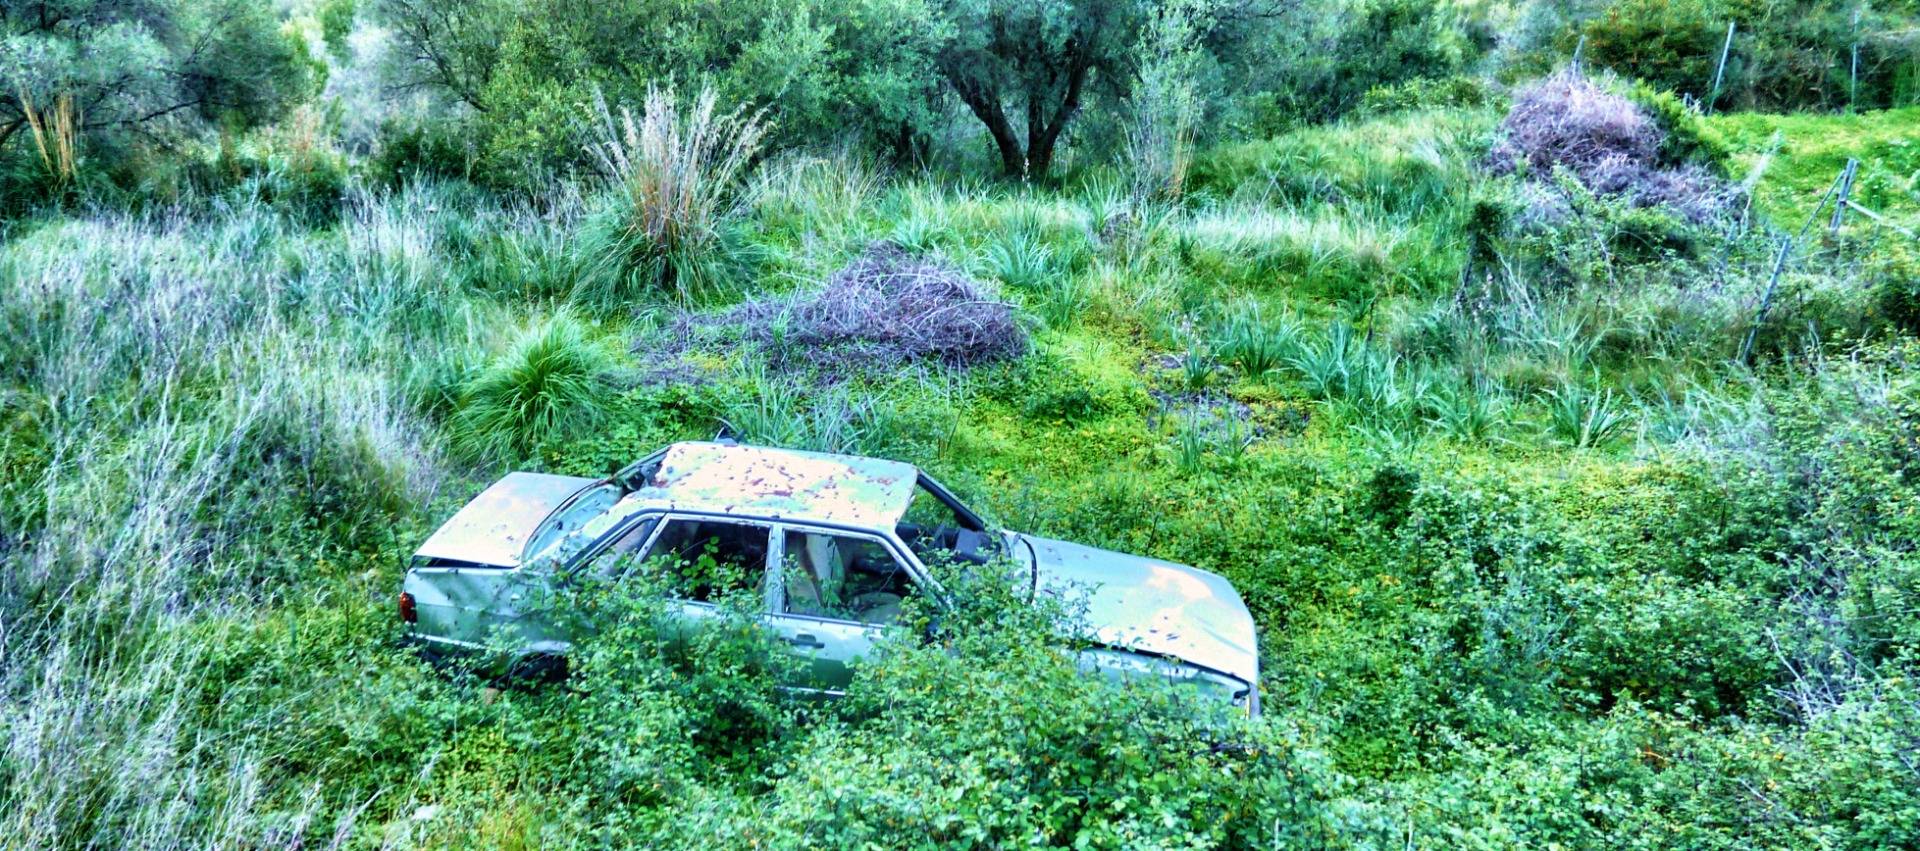 Someone has forgotten his car in the jungle